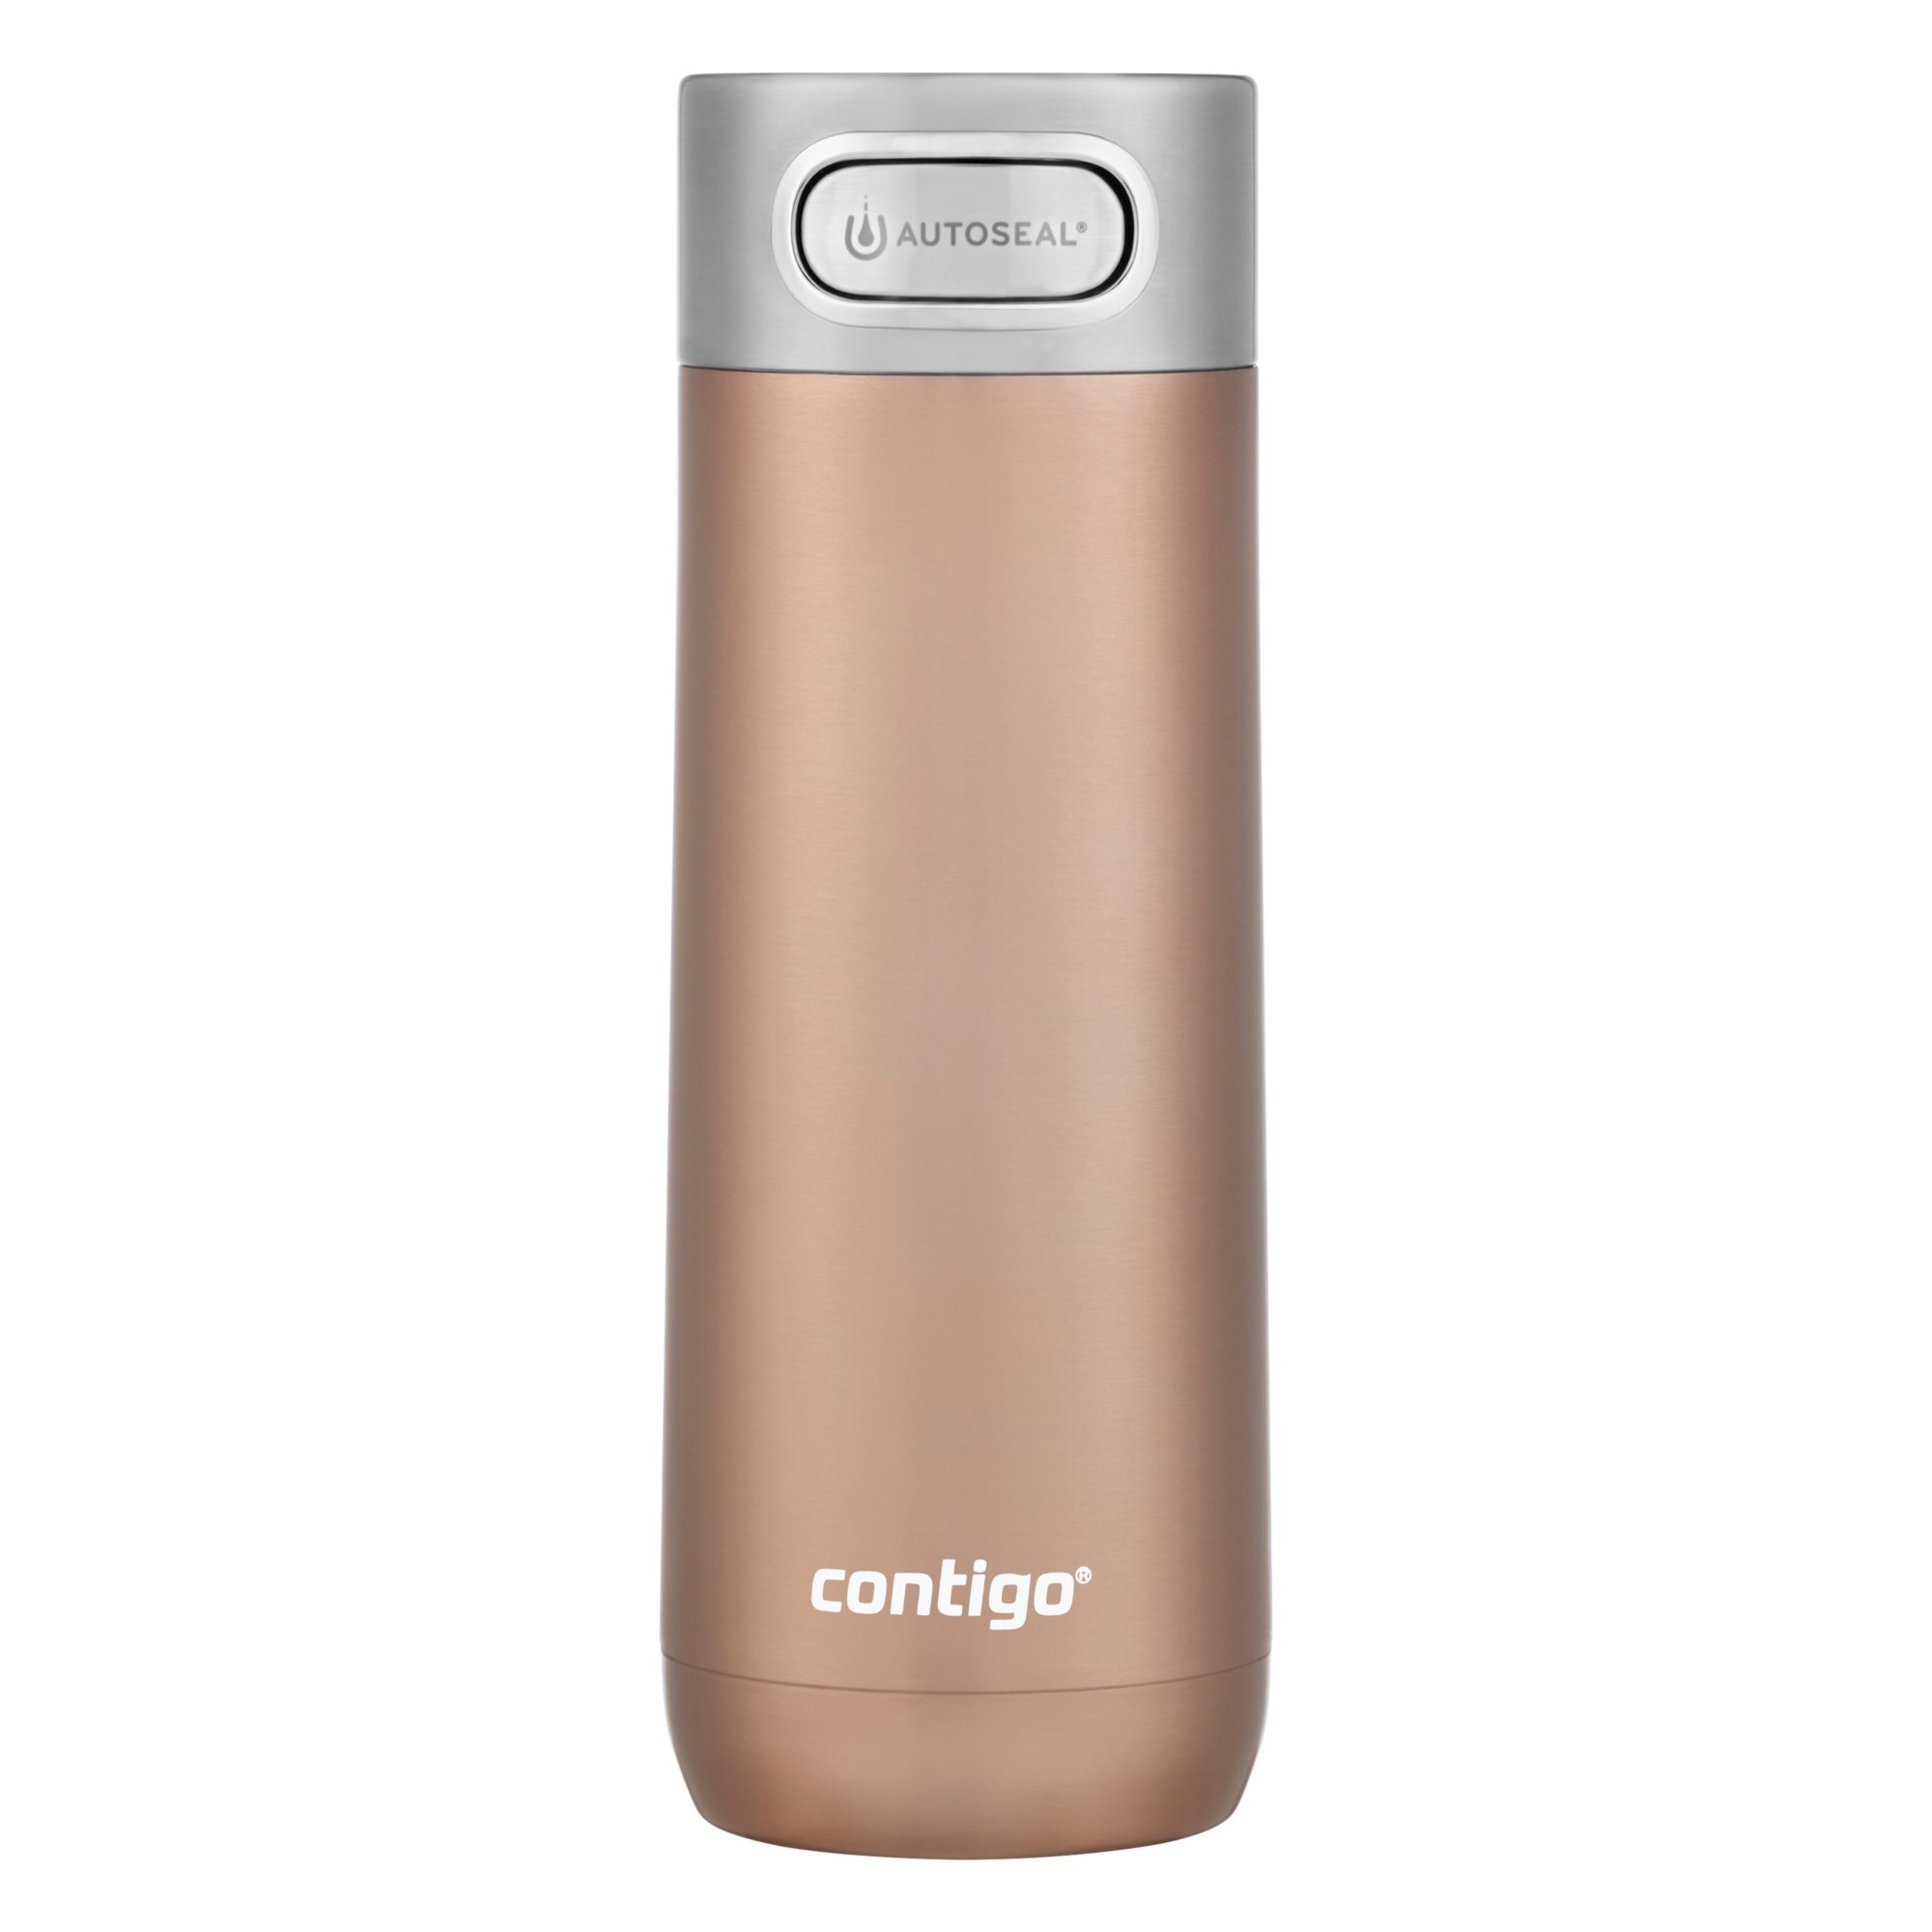  Contigo West Loop Stainless Steel Vacuum-Insulated Travel Mug  with Spill-Proof Lid, Keeps Drinks Hot up to 5 Hours and Cold up to 12  Hours, 20oz Steel : Home & Kitchen